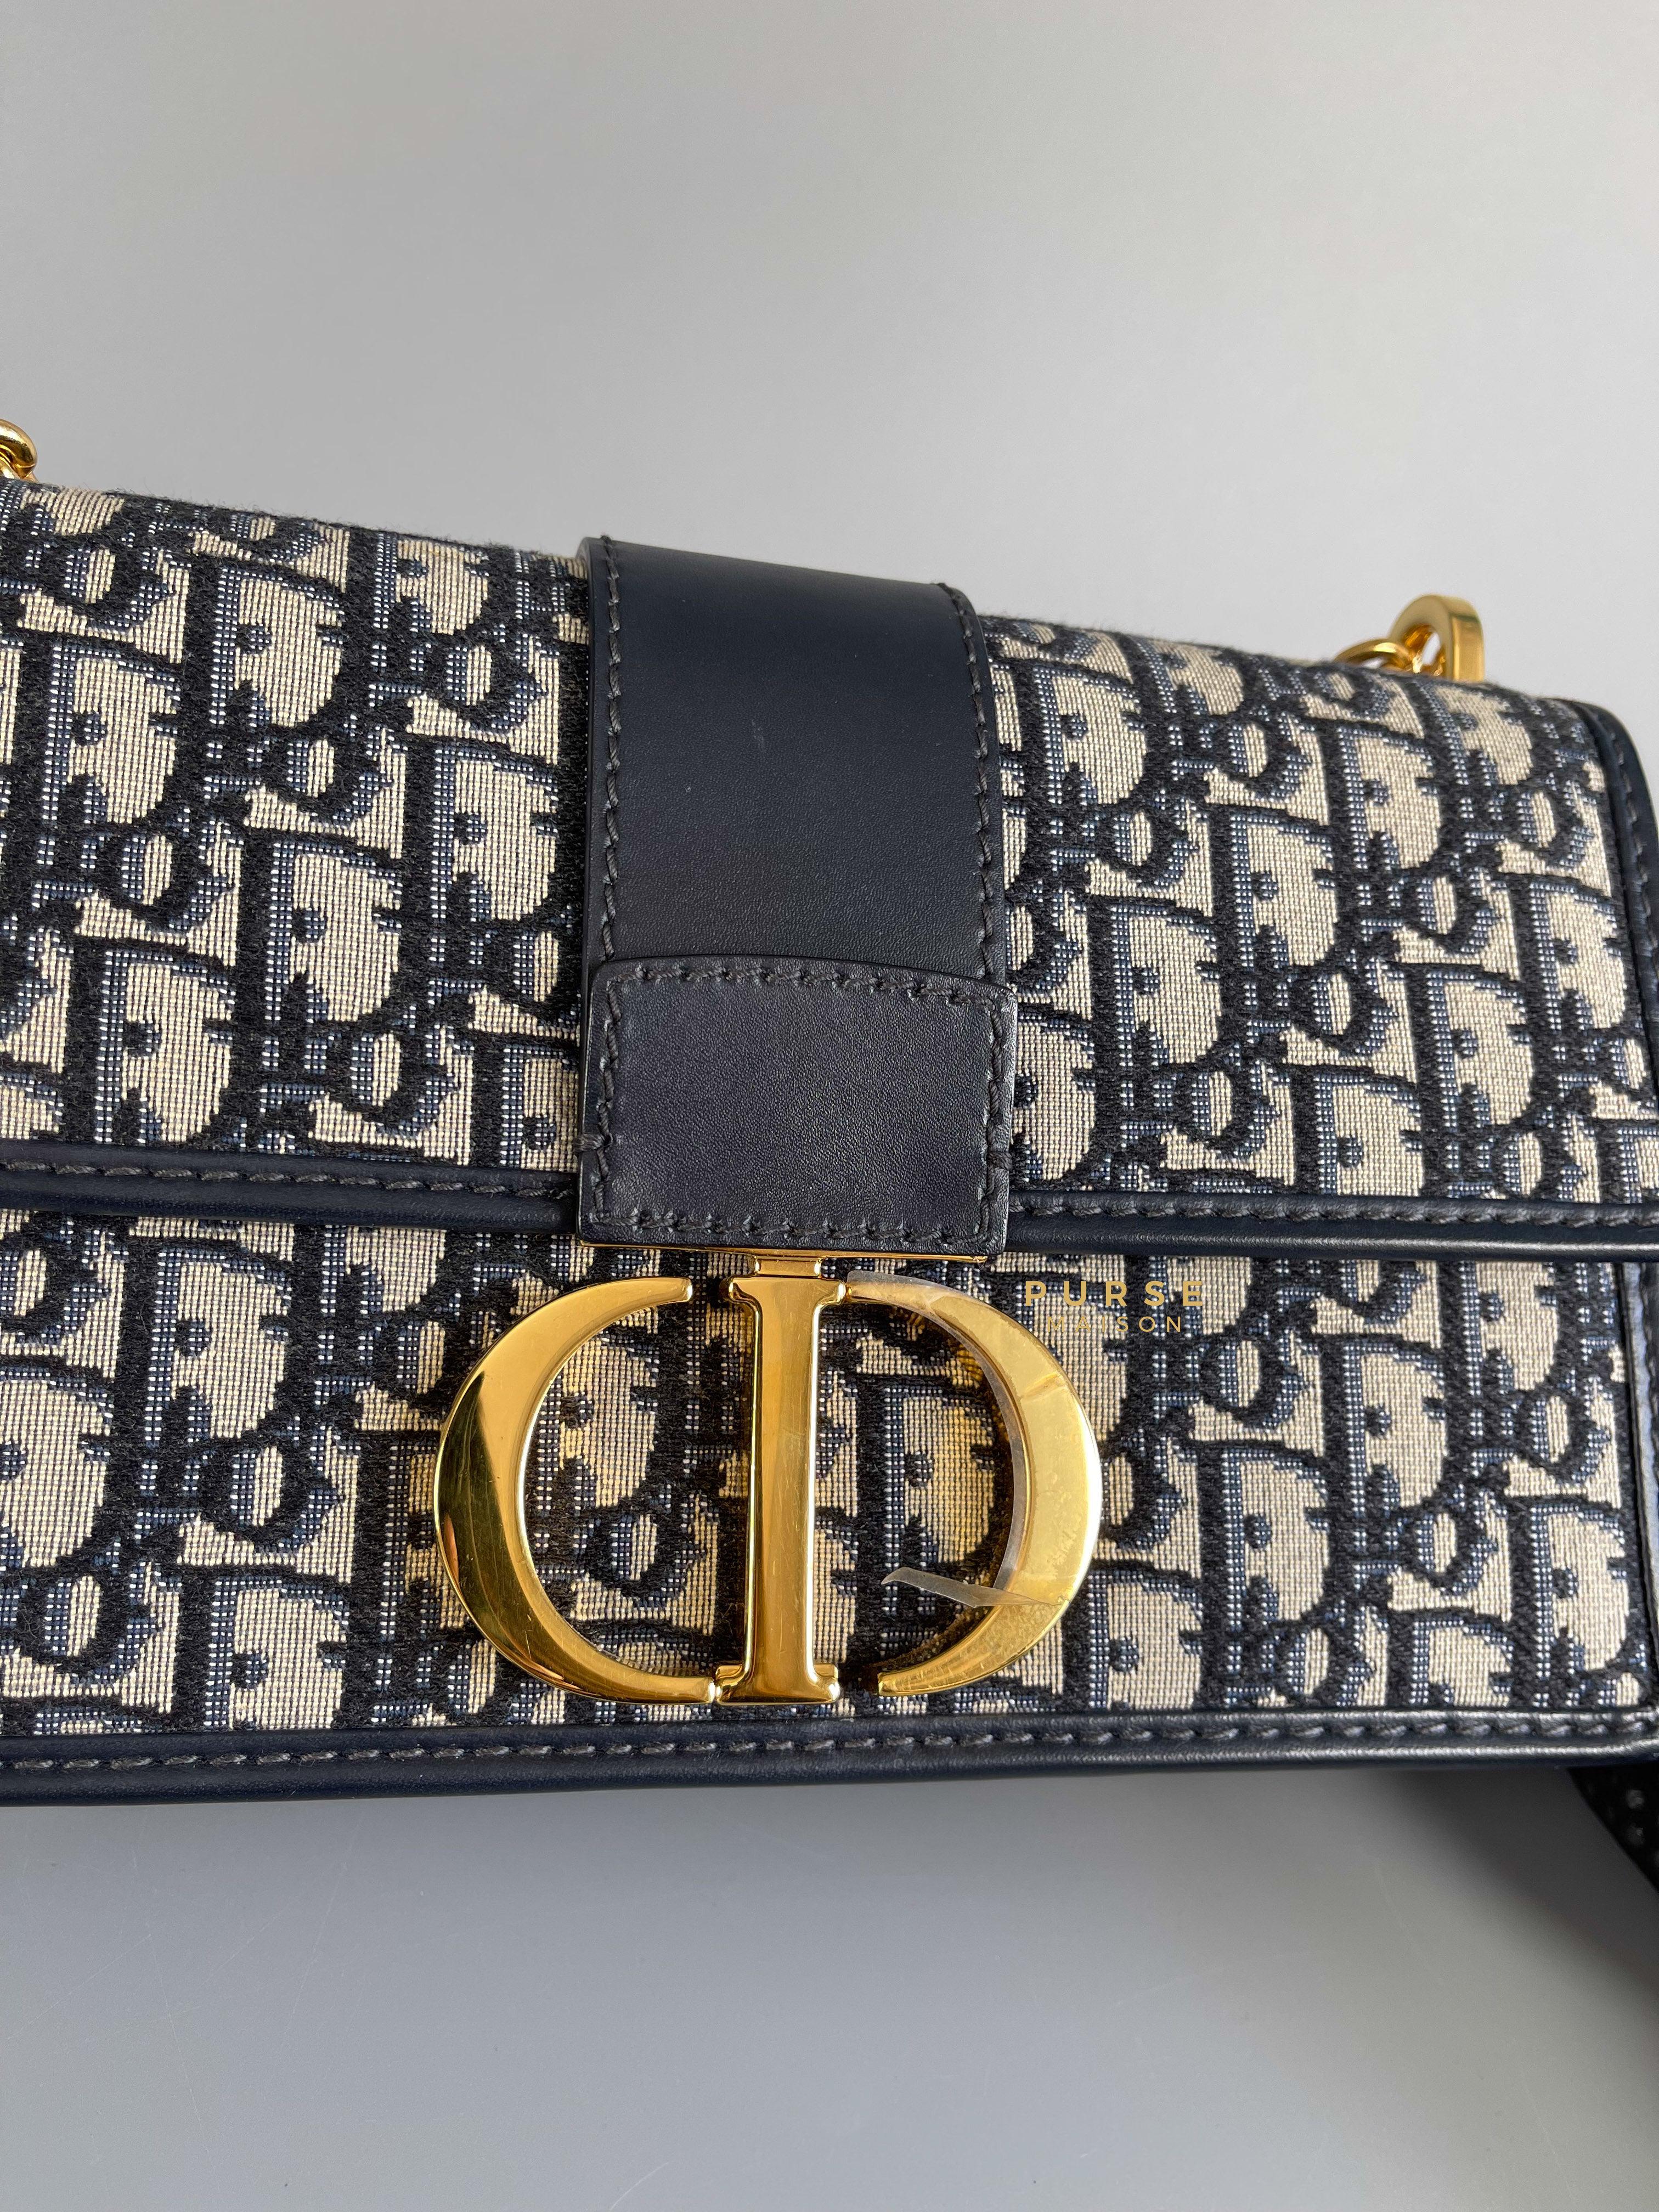 Christian Dior Montaigne 30 Oblique Embroidery Chain Bag in Gold Hardware | Purse Maison Luxury Bags Shop